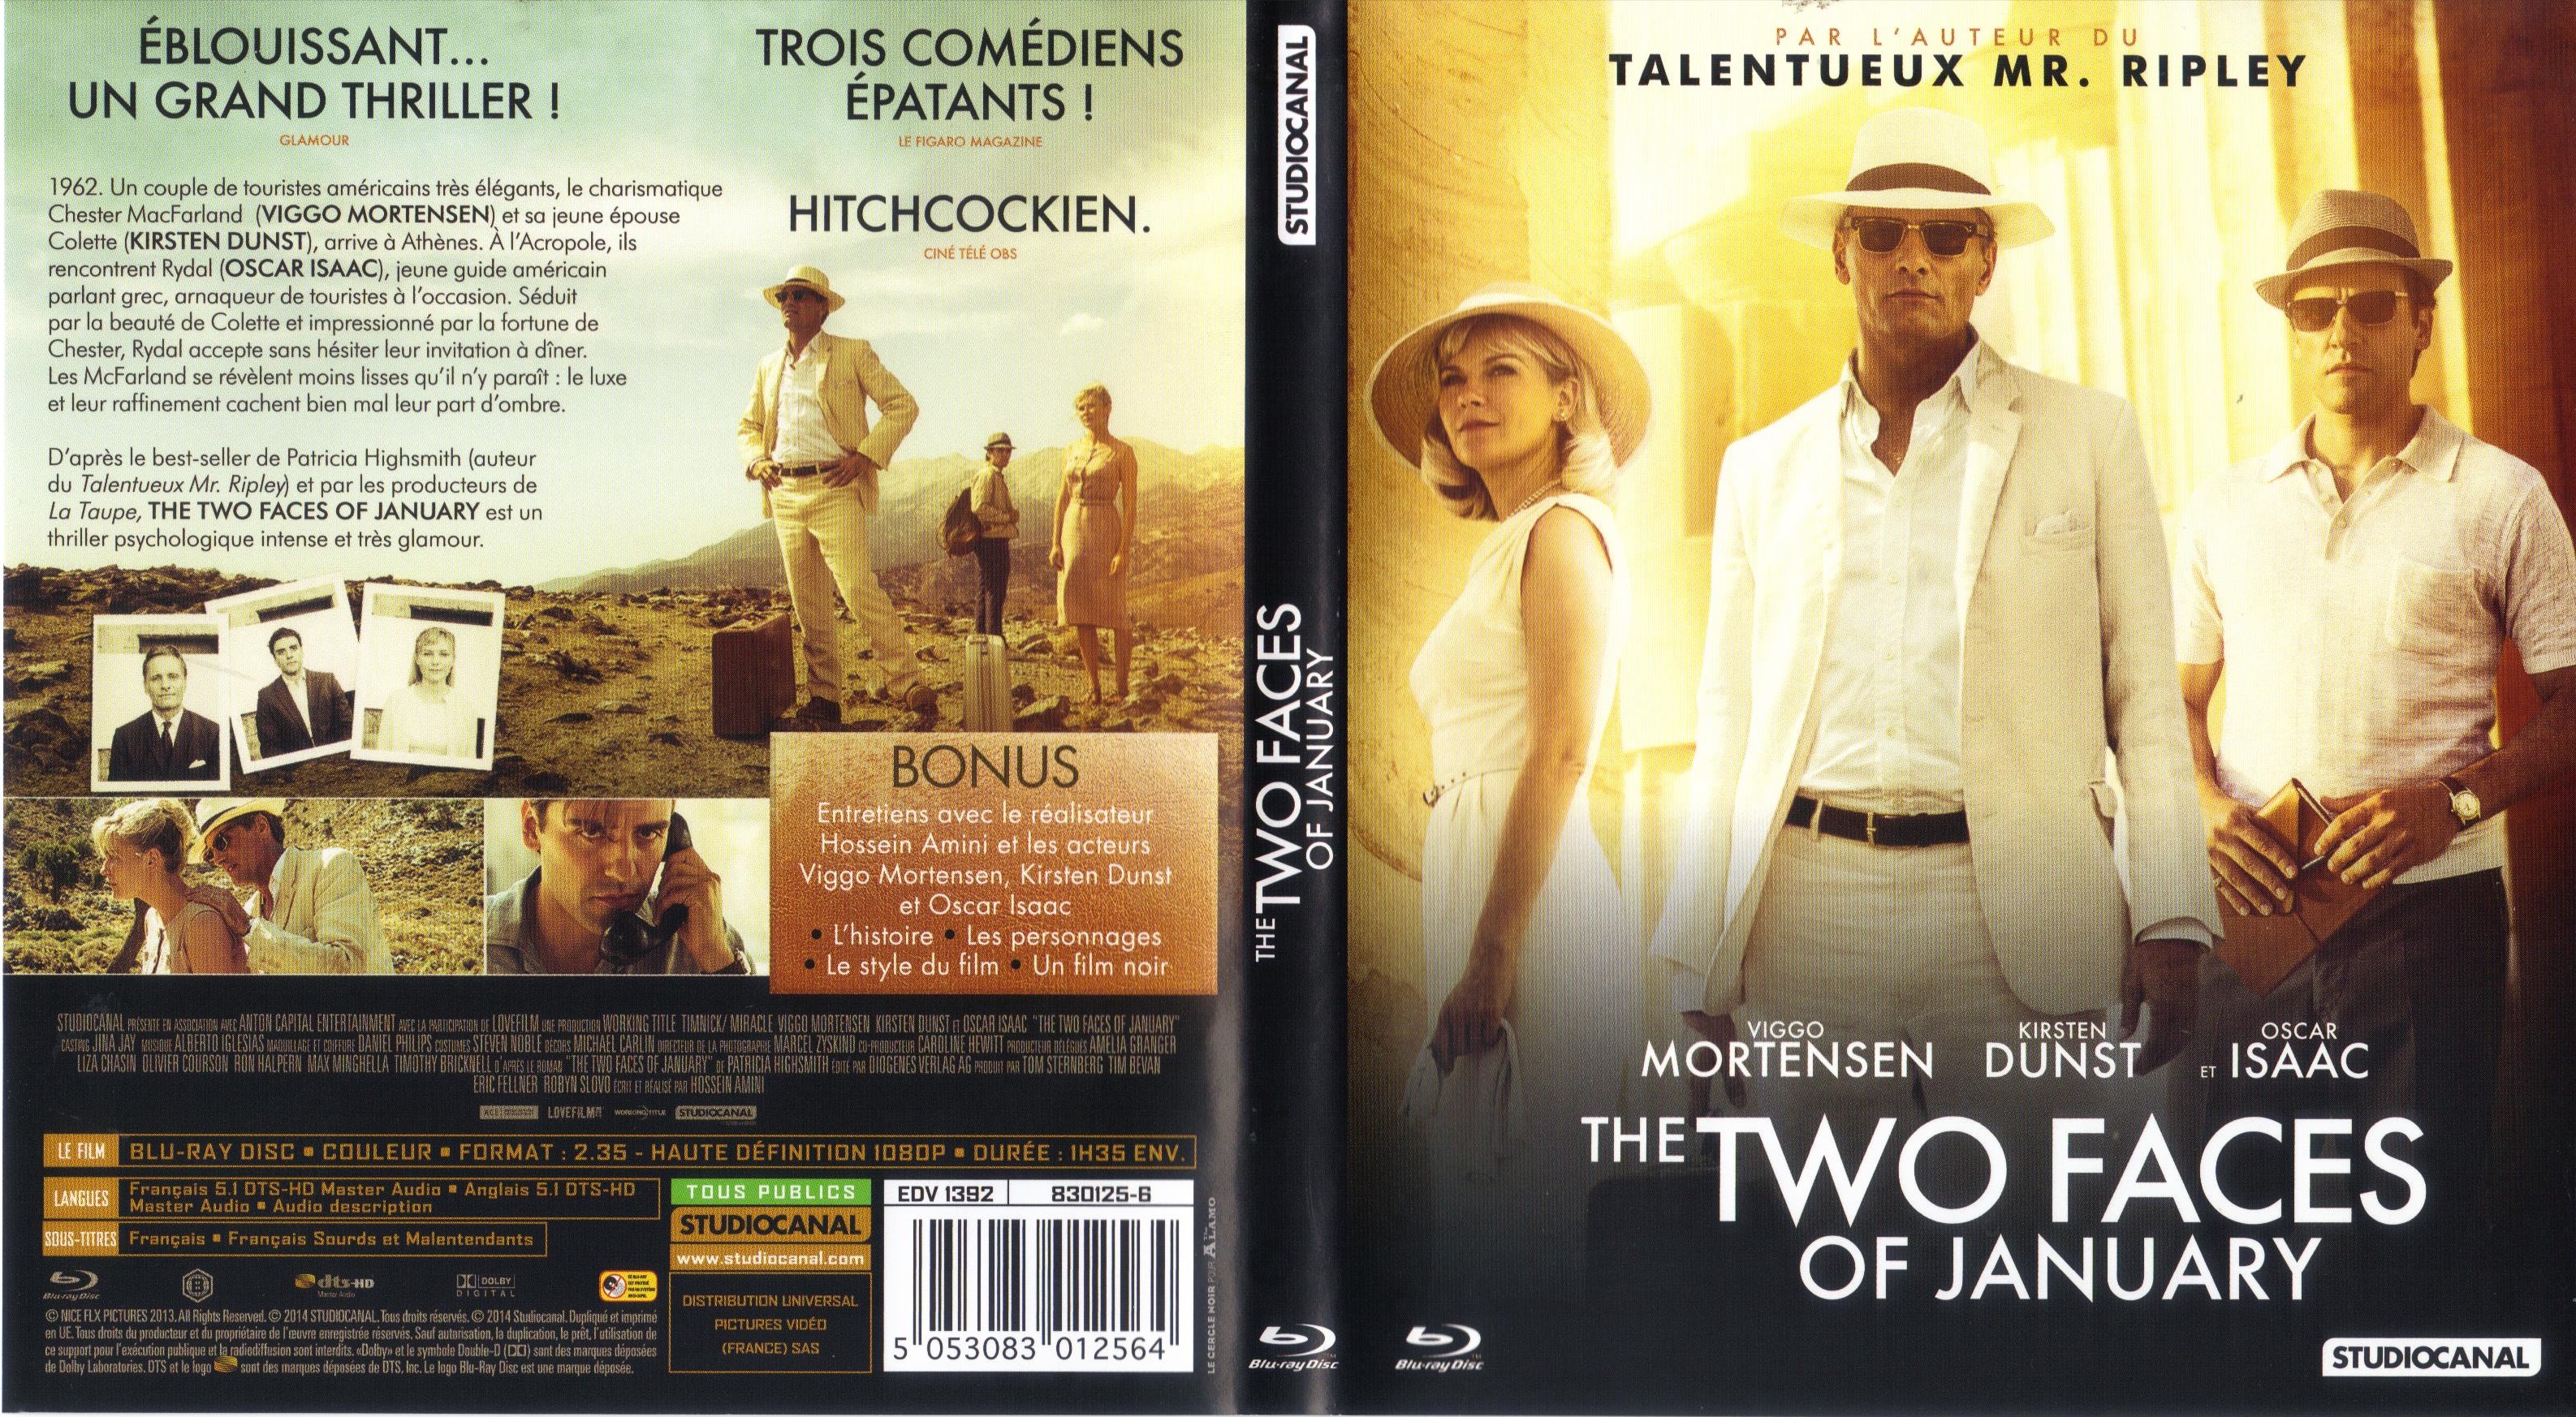 Jaquette DVD The Two Faces of January (BLU-RAY)